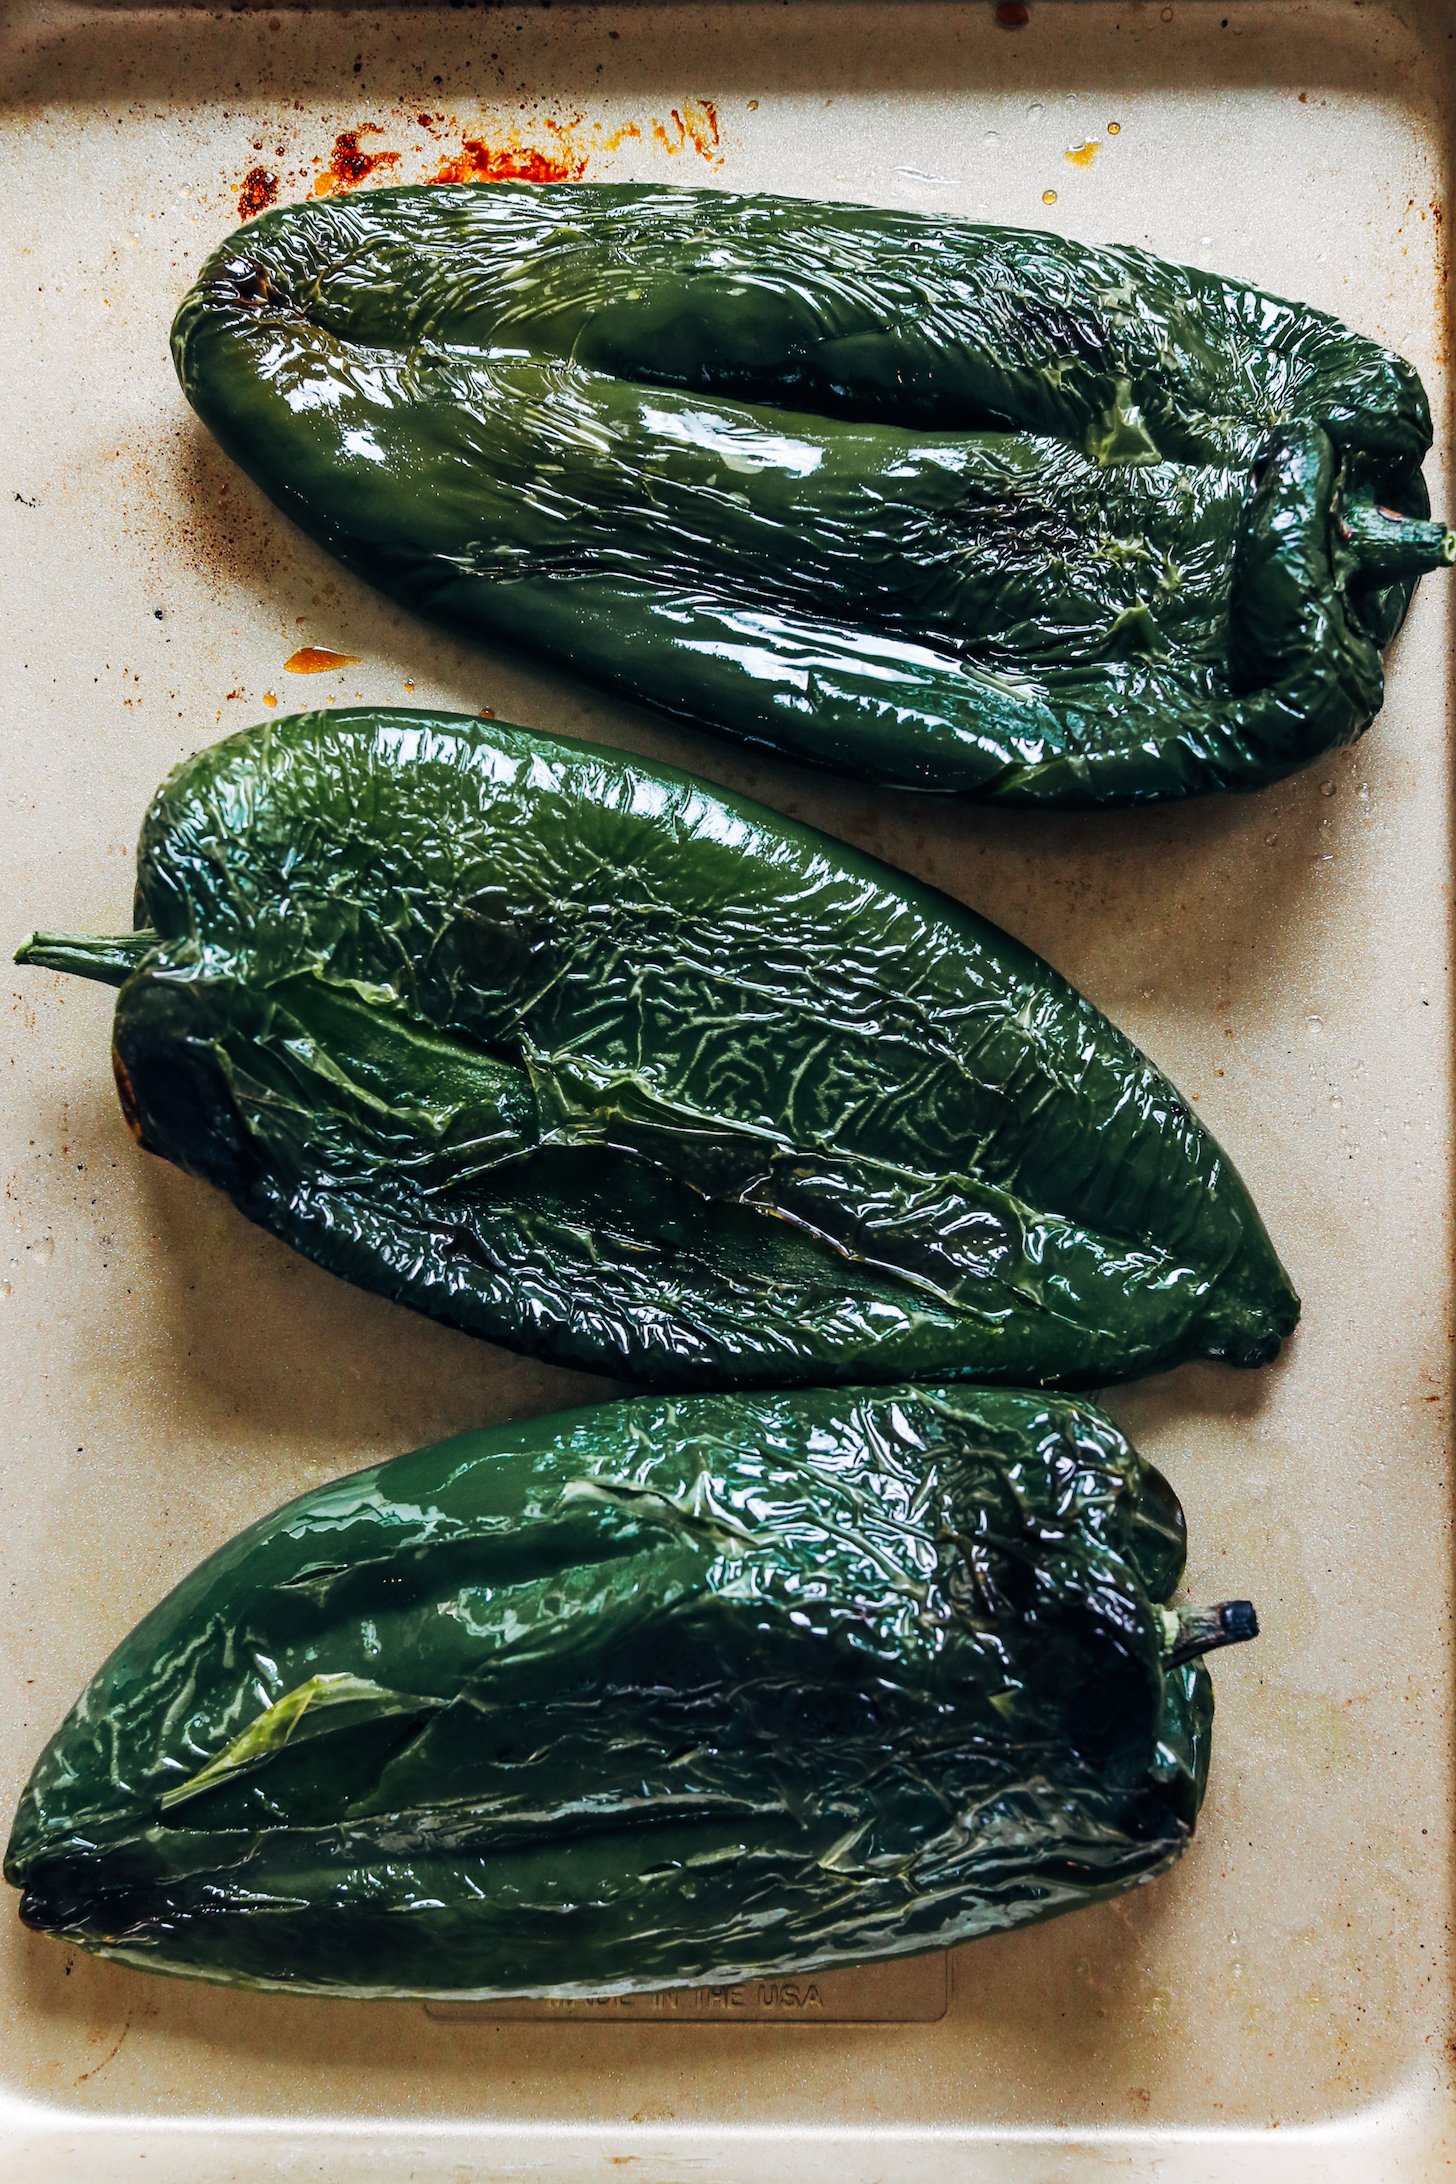 Blistered poblano peppers on a baking sheet